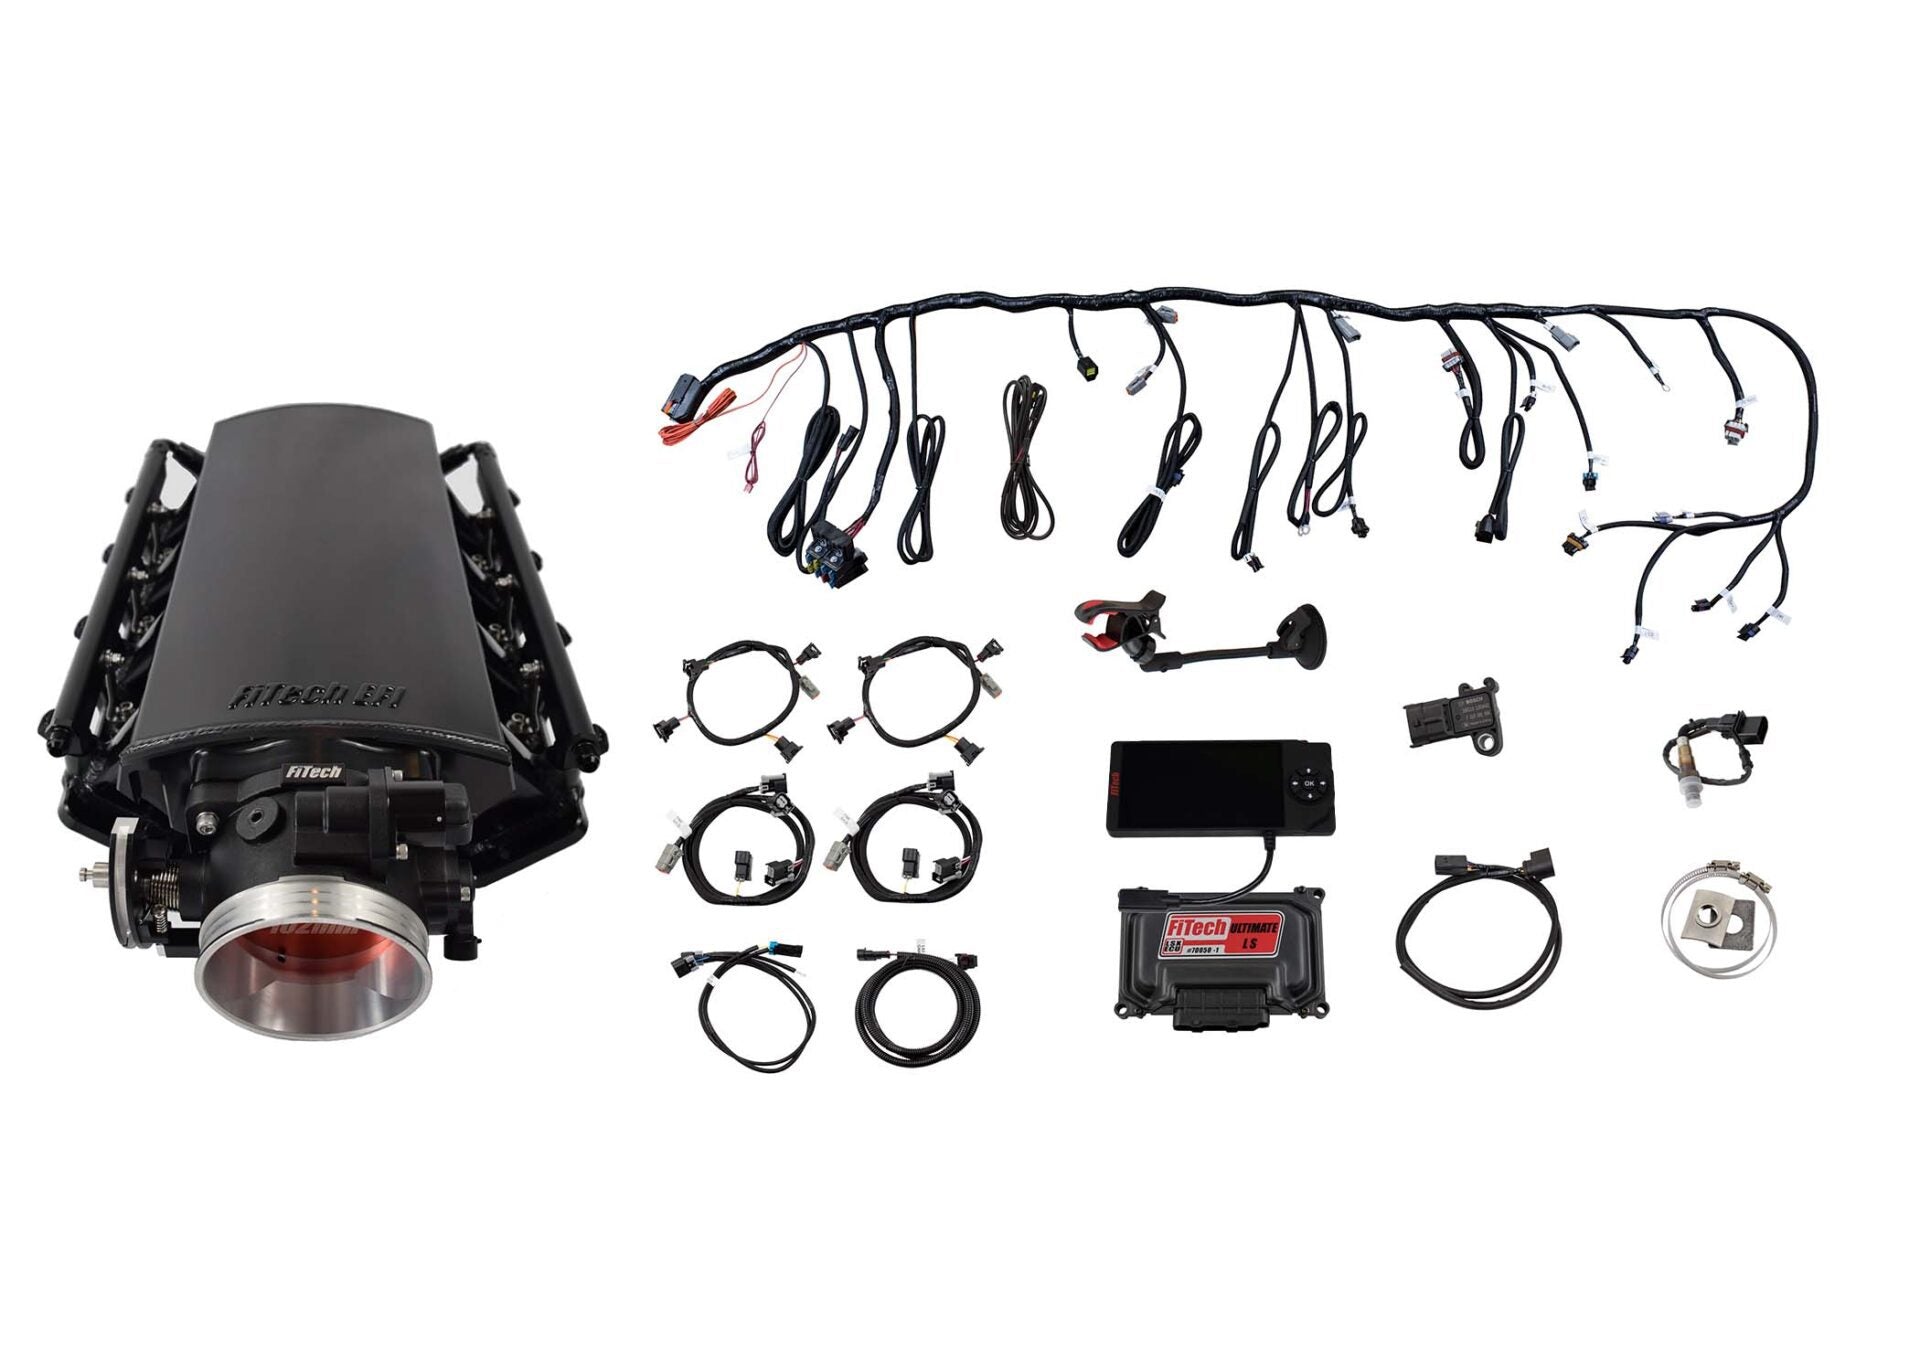 FiTech 70013 Ultimate LS Kit (750 HP, No Transmission Control)-for LS3/L92